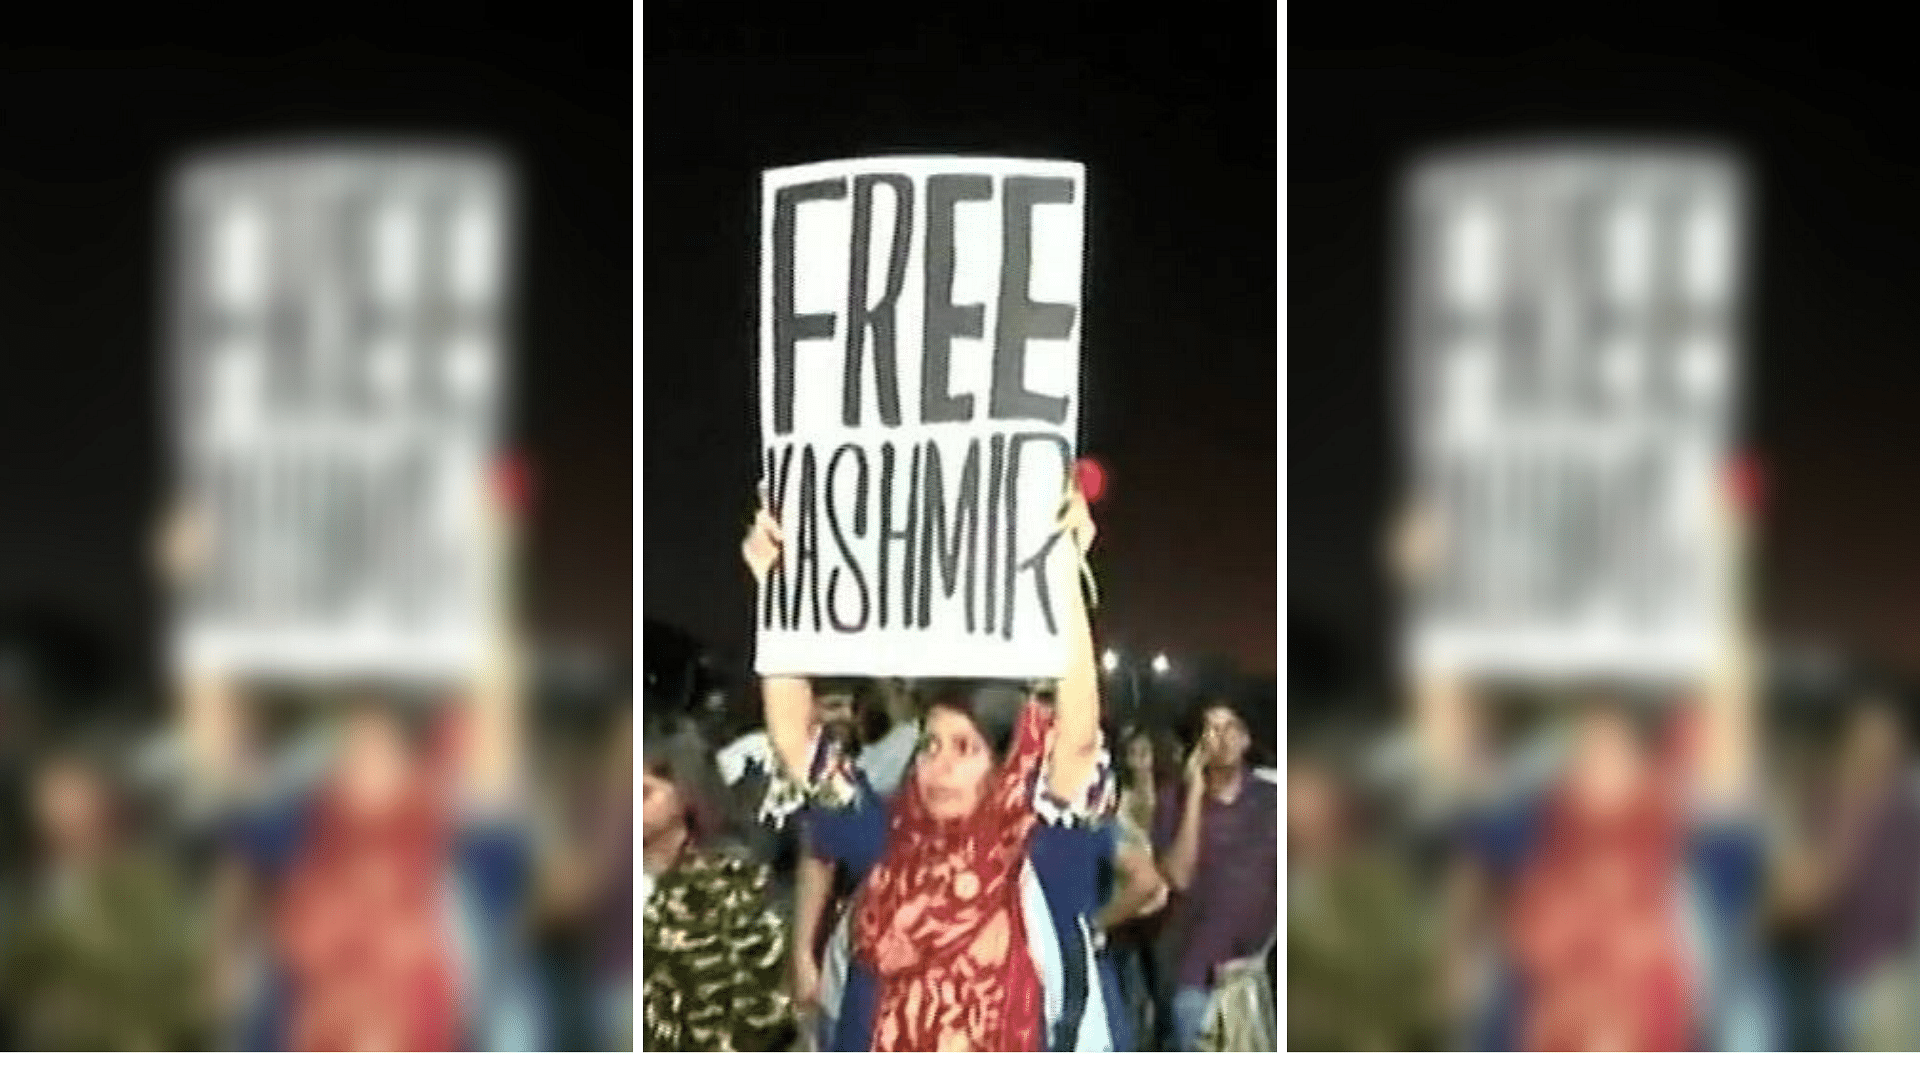 Mehak Prabhu, a Mumbai resident, was criticised on social media for holding a ‘Free Kashmir’ placard at a protest.